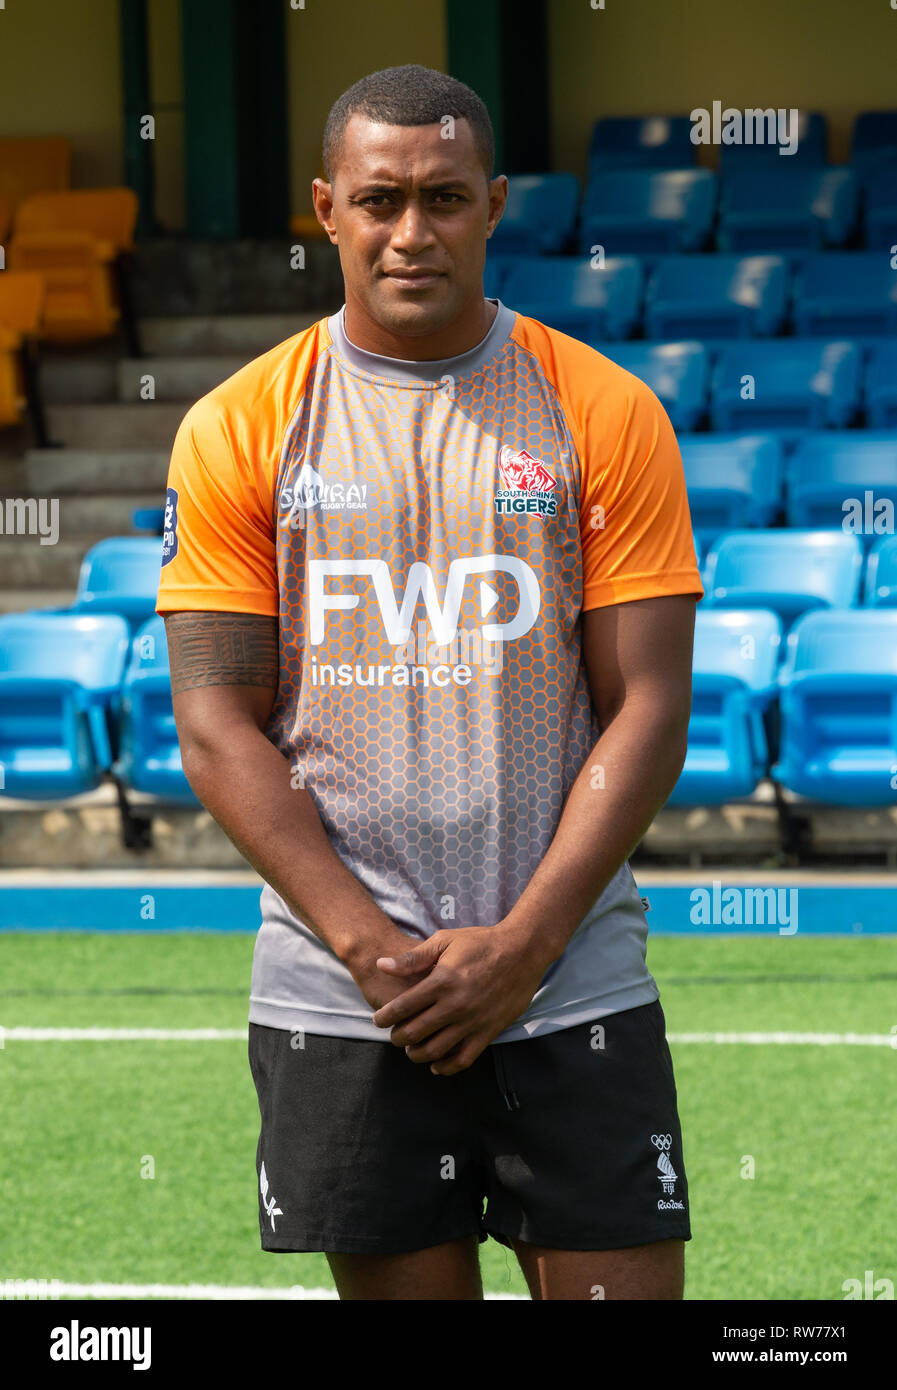 HONG KONG, HONG KONG SAR, CHINA. MARCH 5th 2019. Fiji's Samisoni Viriviri. Launch of the South China Tigers professional rugby team to play in the Global Rapid Rugby tournament. Fiji's Samisoni Viriviri joins the FWD South China Tigers, a new professional team playing in the Global Rapid Rugby. Viriviri, a gold medalist for 7's at the Rio Olympics, has played for French teams Montpelier and Montauban but is most know at Sevens player of the year 2014. Viriviri looks forward to the new professional Rapid Rugby tournament with upcoming Asian and Australian showcase matches. Rapid Rugby was conce Stock Photo